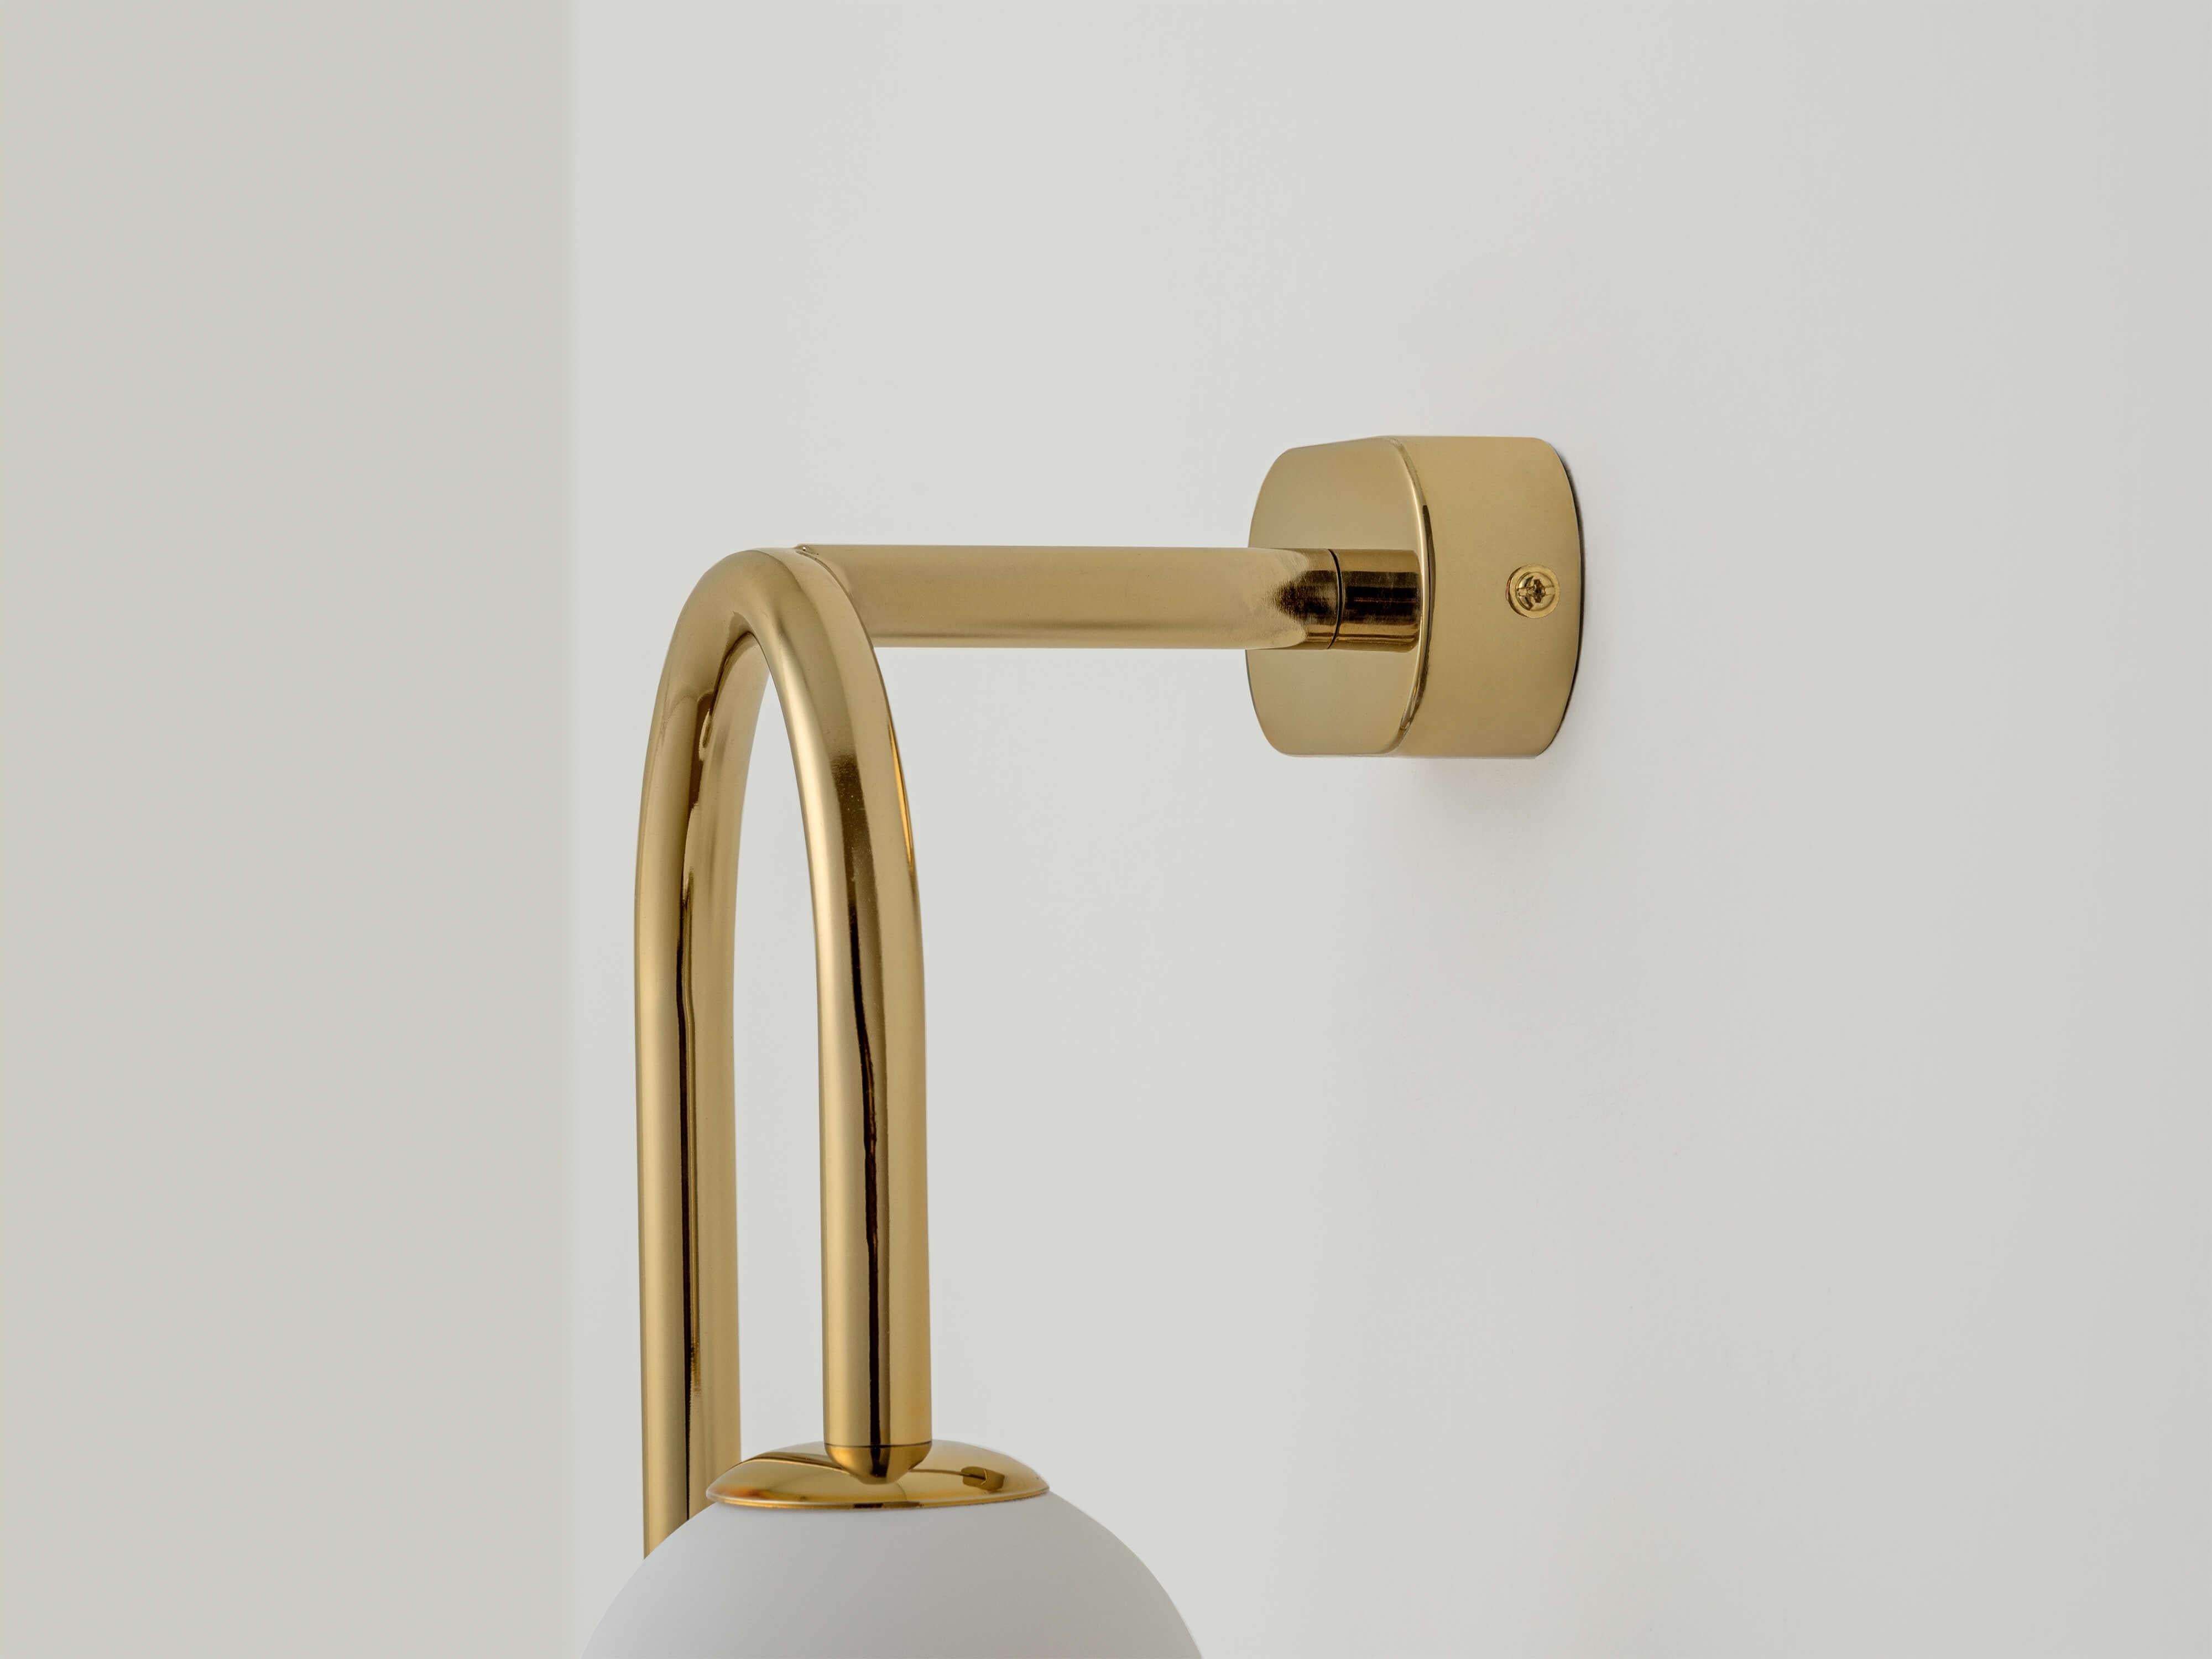 The brass drop curve wall light by houseof is a statement piece which will add character to your home. Hang in pairs full maximum impact. Wall lights are a great space saving option and add pockets of light to dark corners. Hung in multiples they